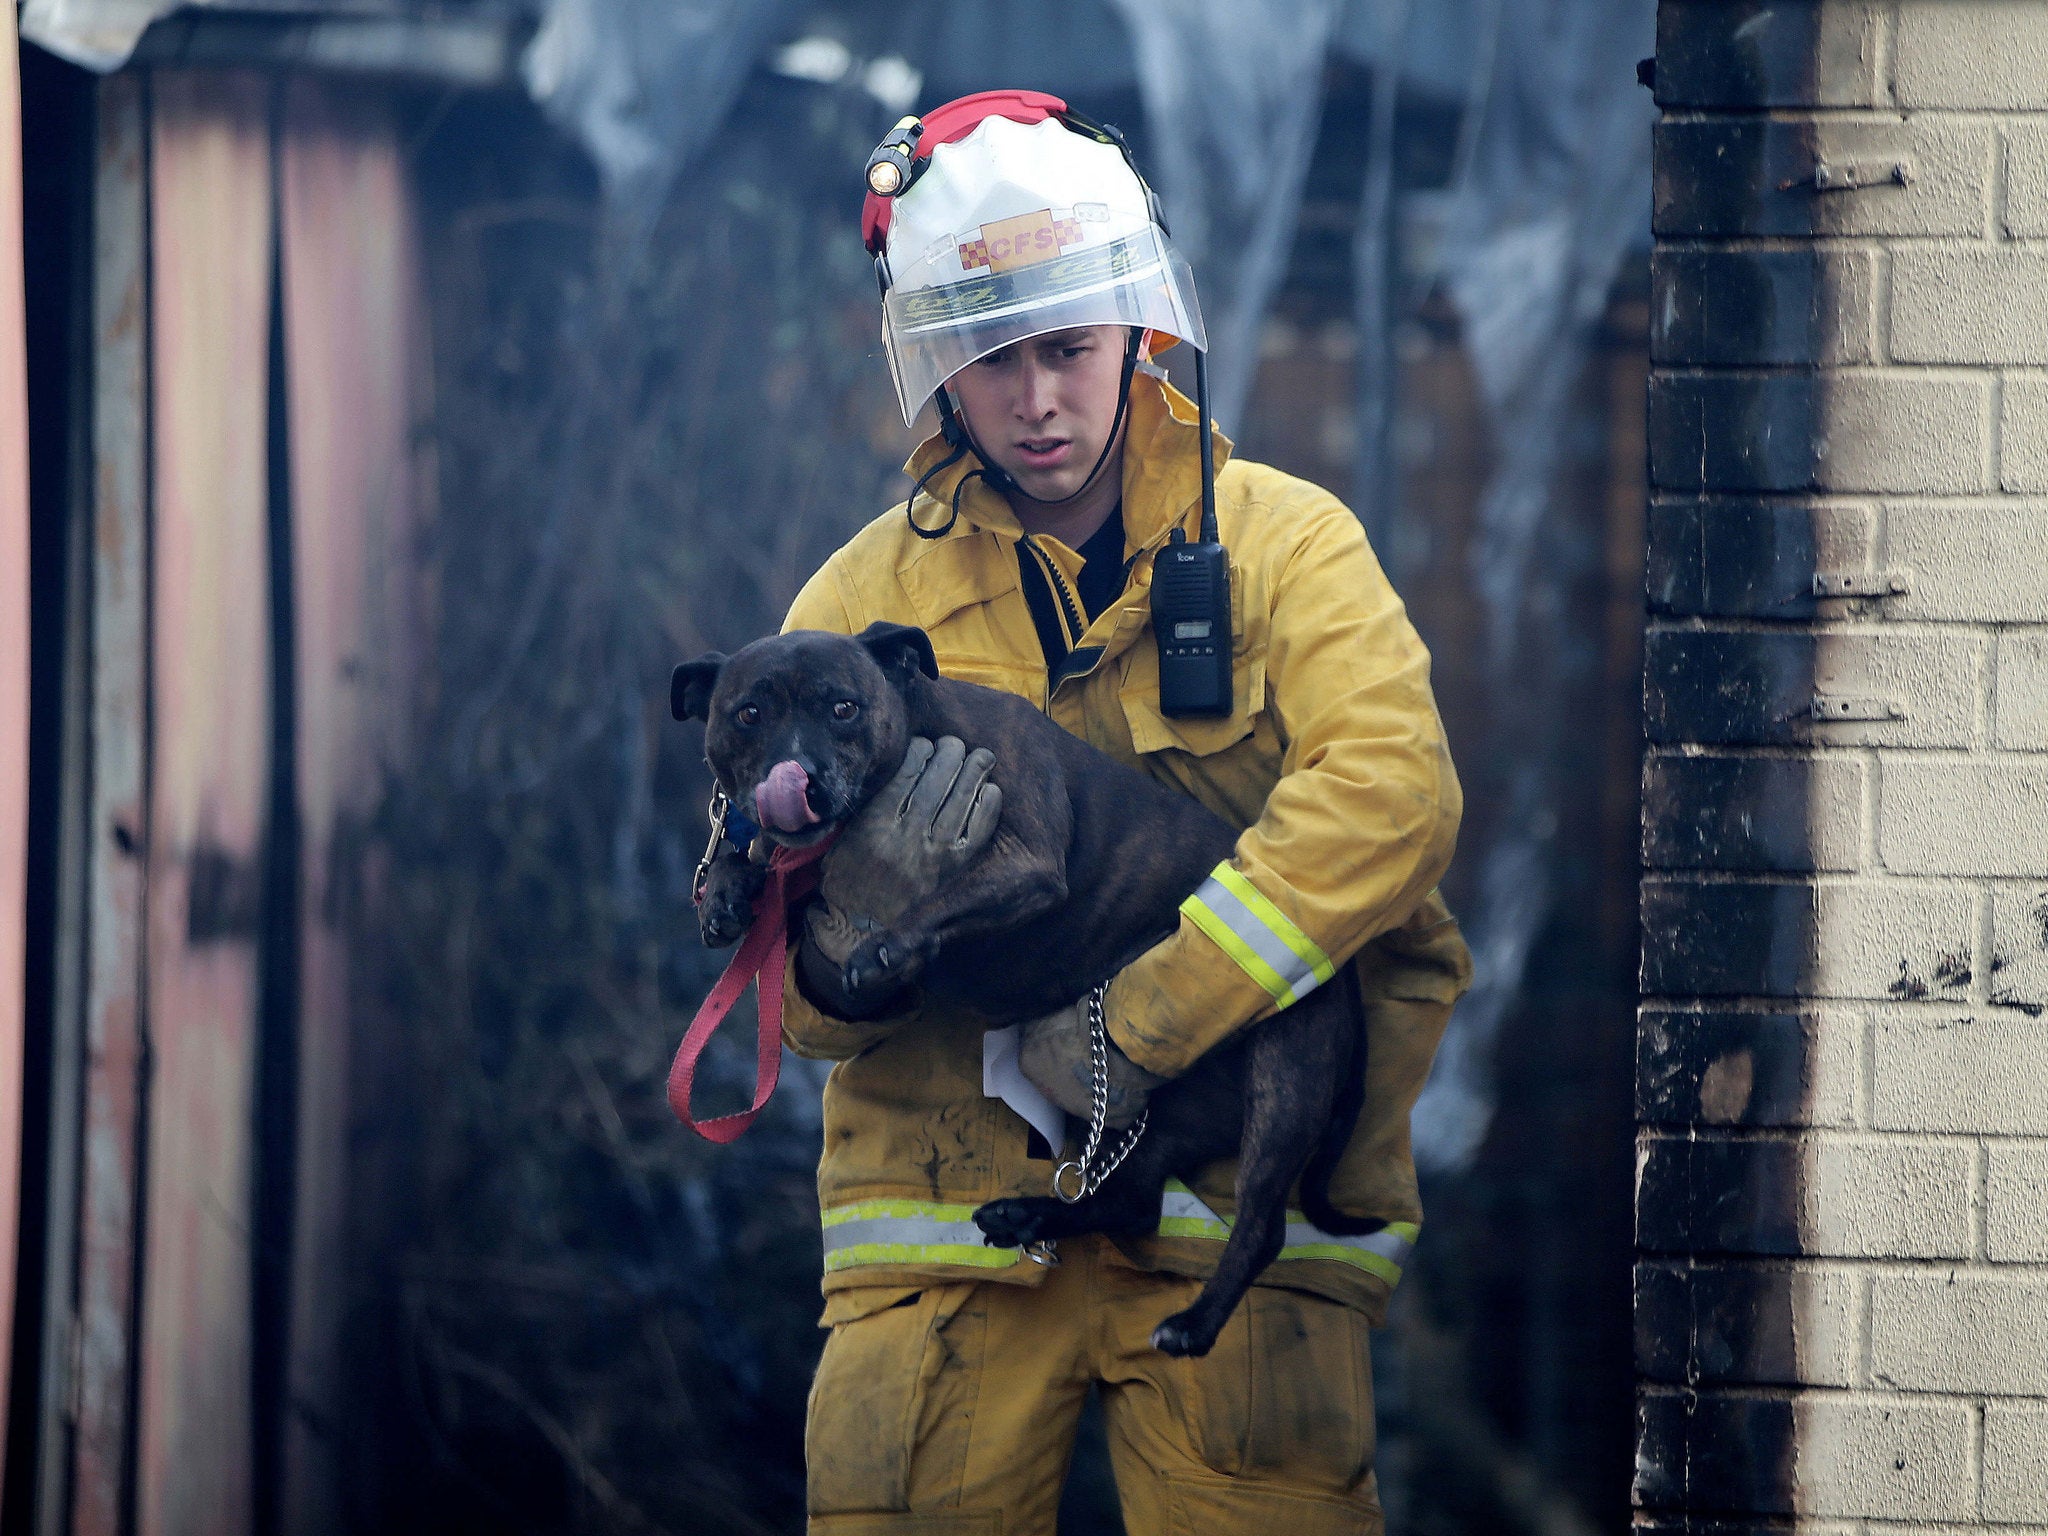 CFS volunteer Lukas Lane-Geldmacher rescues a dog from the Tea Tree Gully Boarding Kennel and Cattery in Inglewood, South Australia